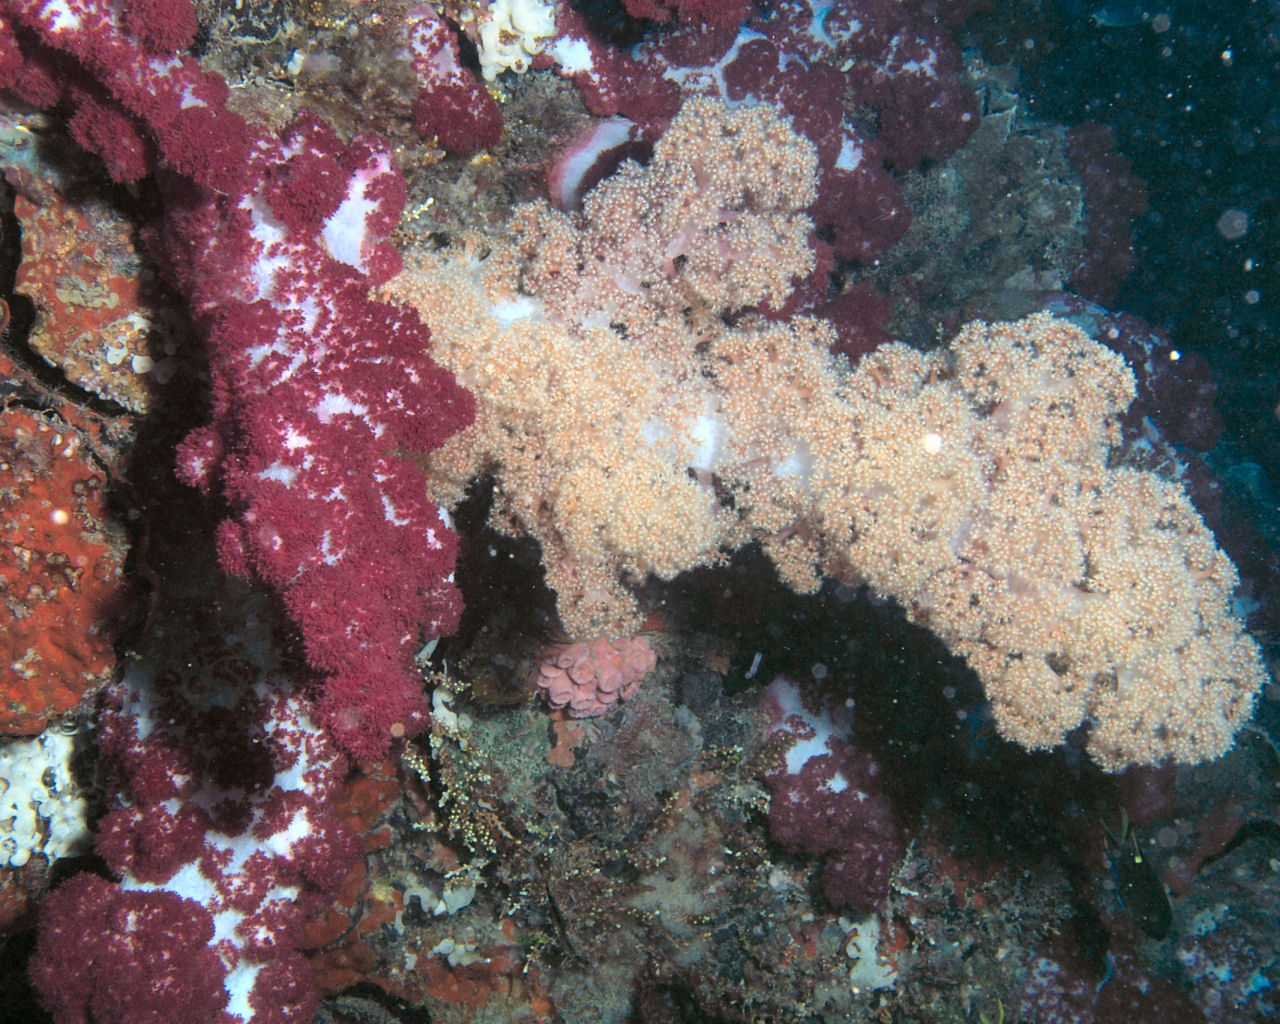 Red and Yellow soft coral on the Yongala